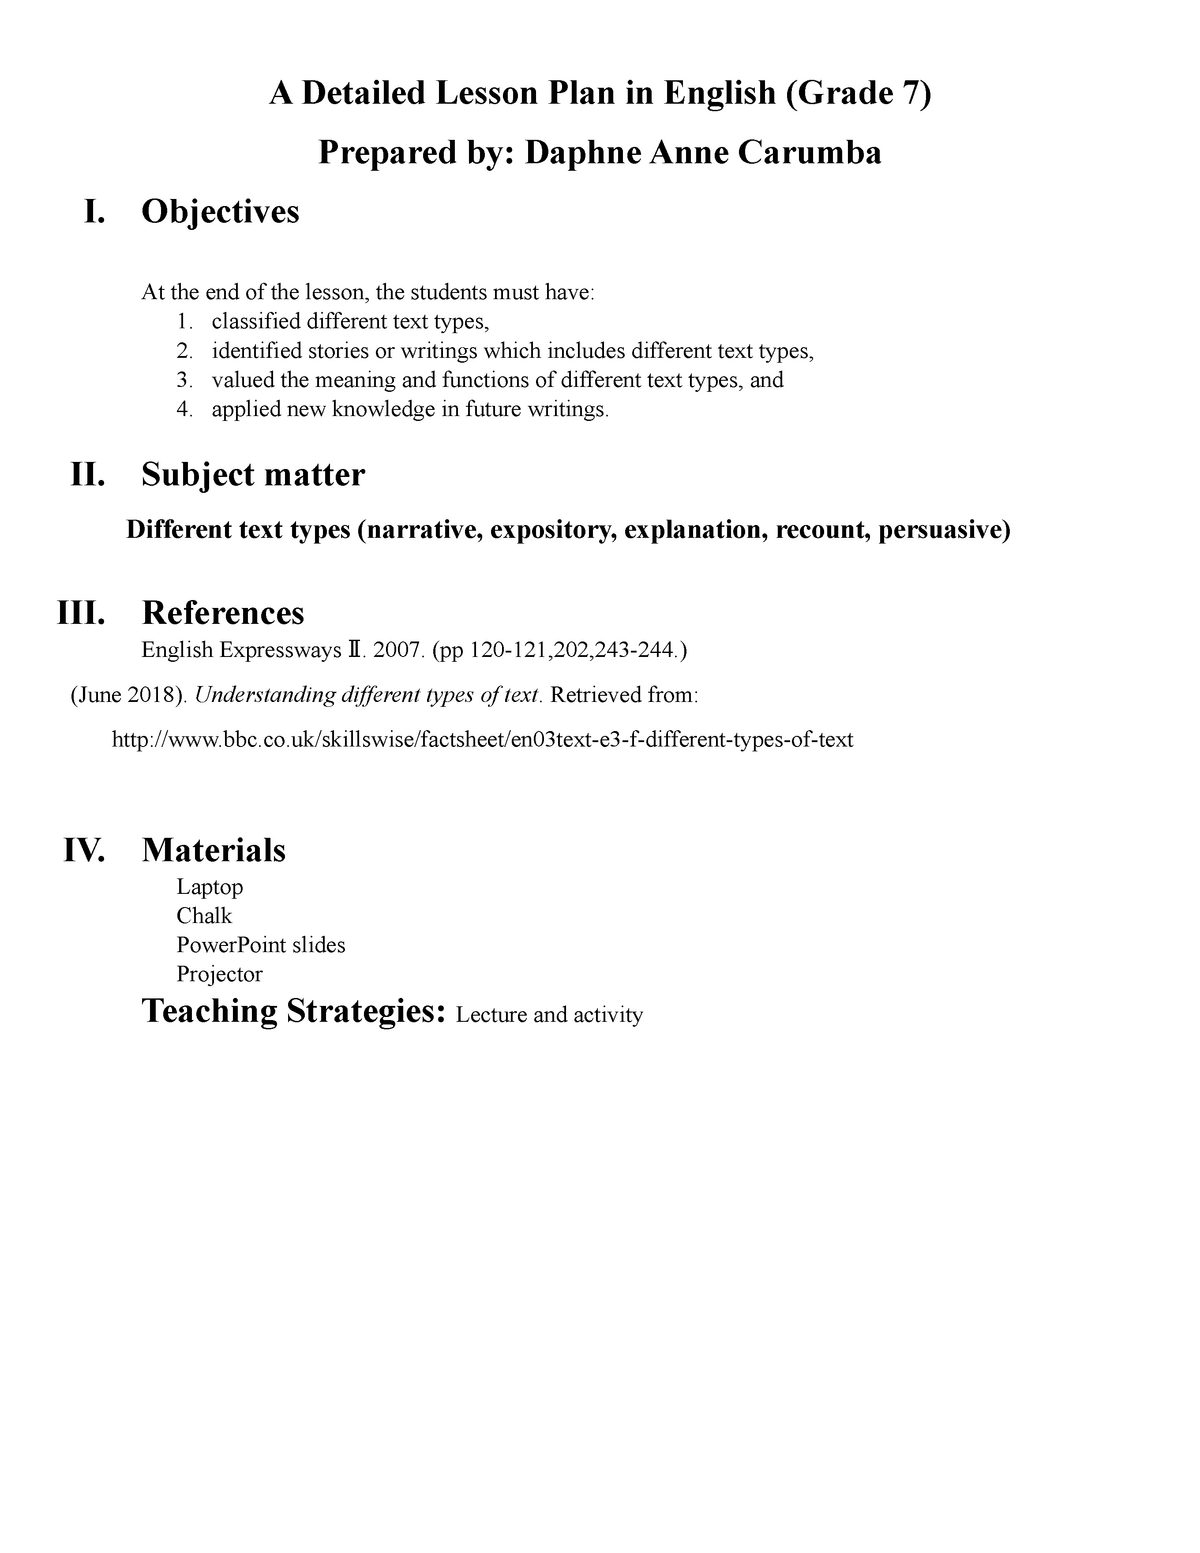 a-detailed-lesson-plan-prin-of-teaching-text-types-a-detailed